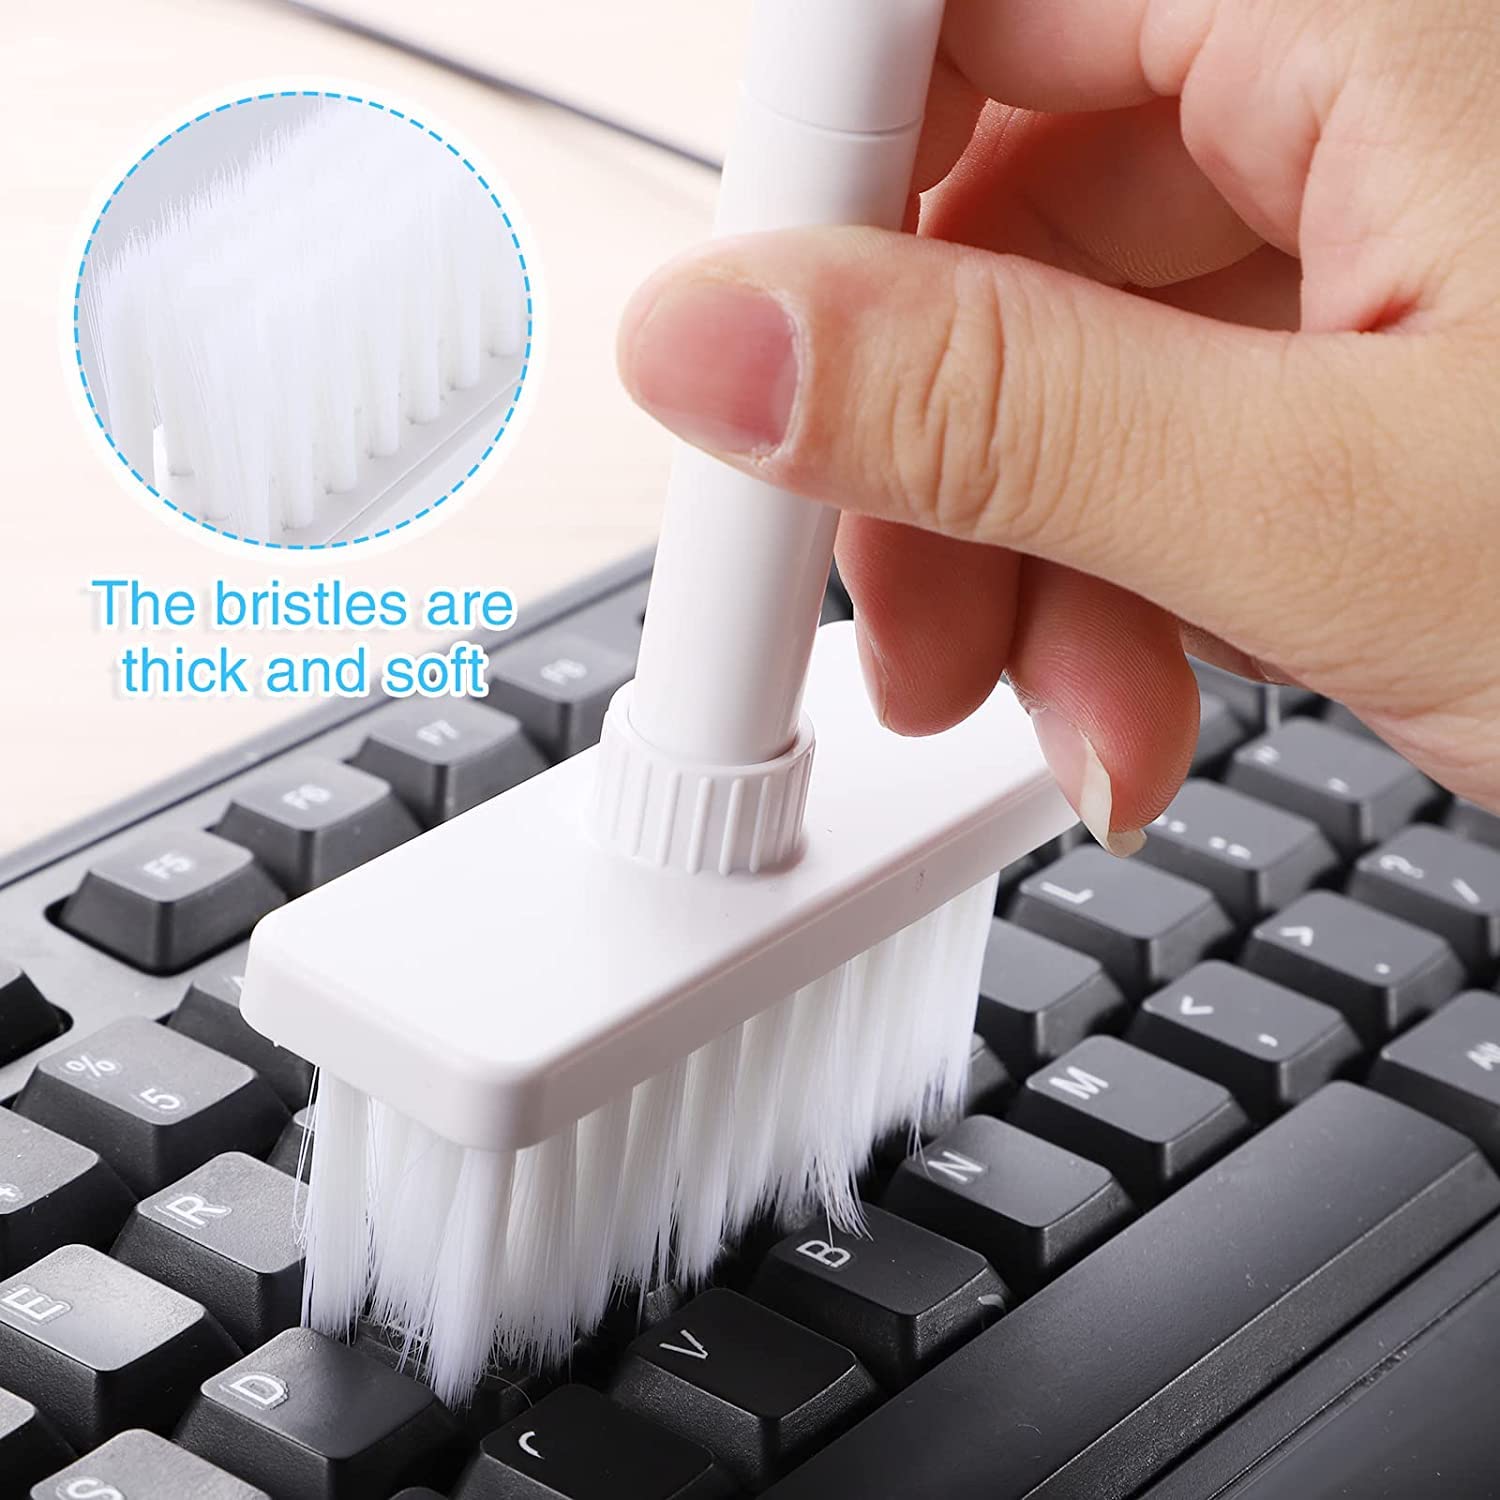 Keyboard with cleaning brush